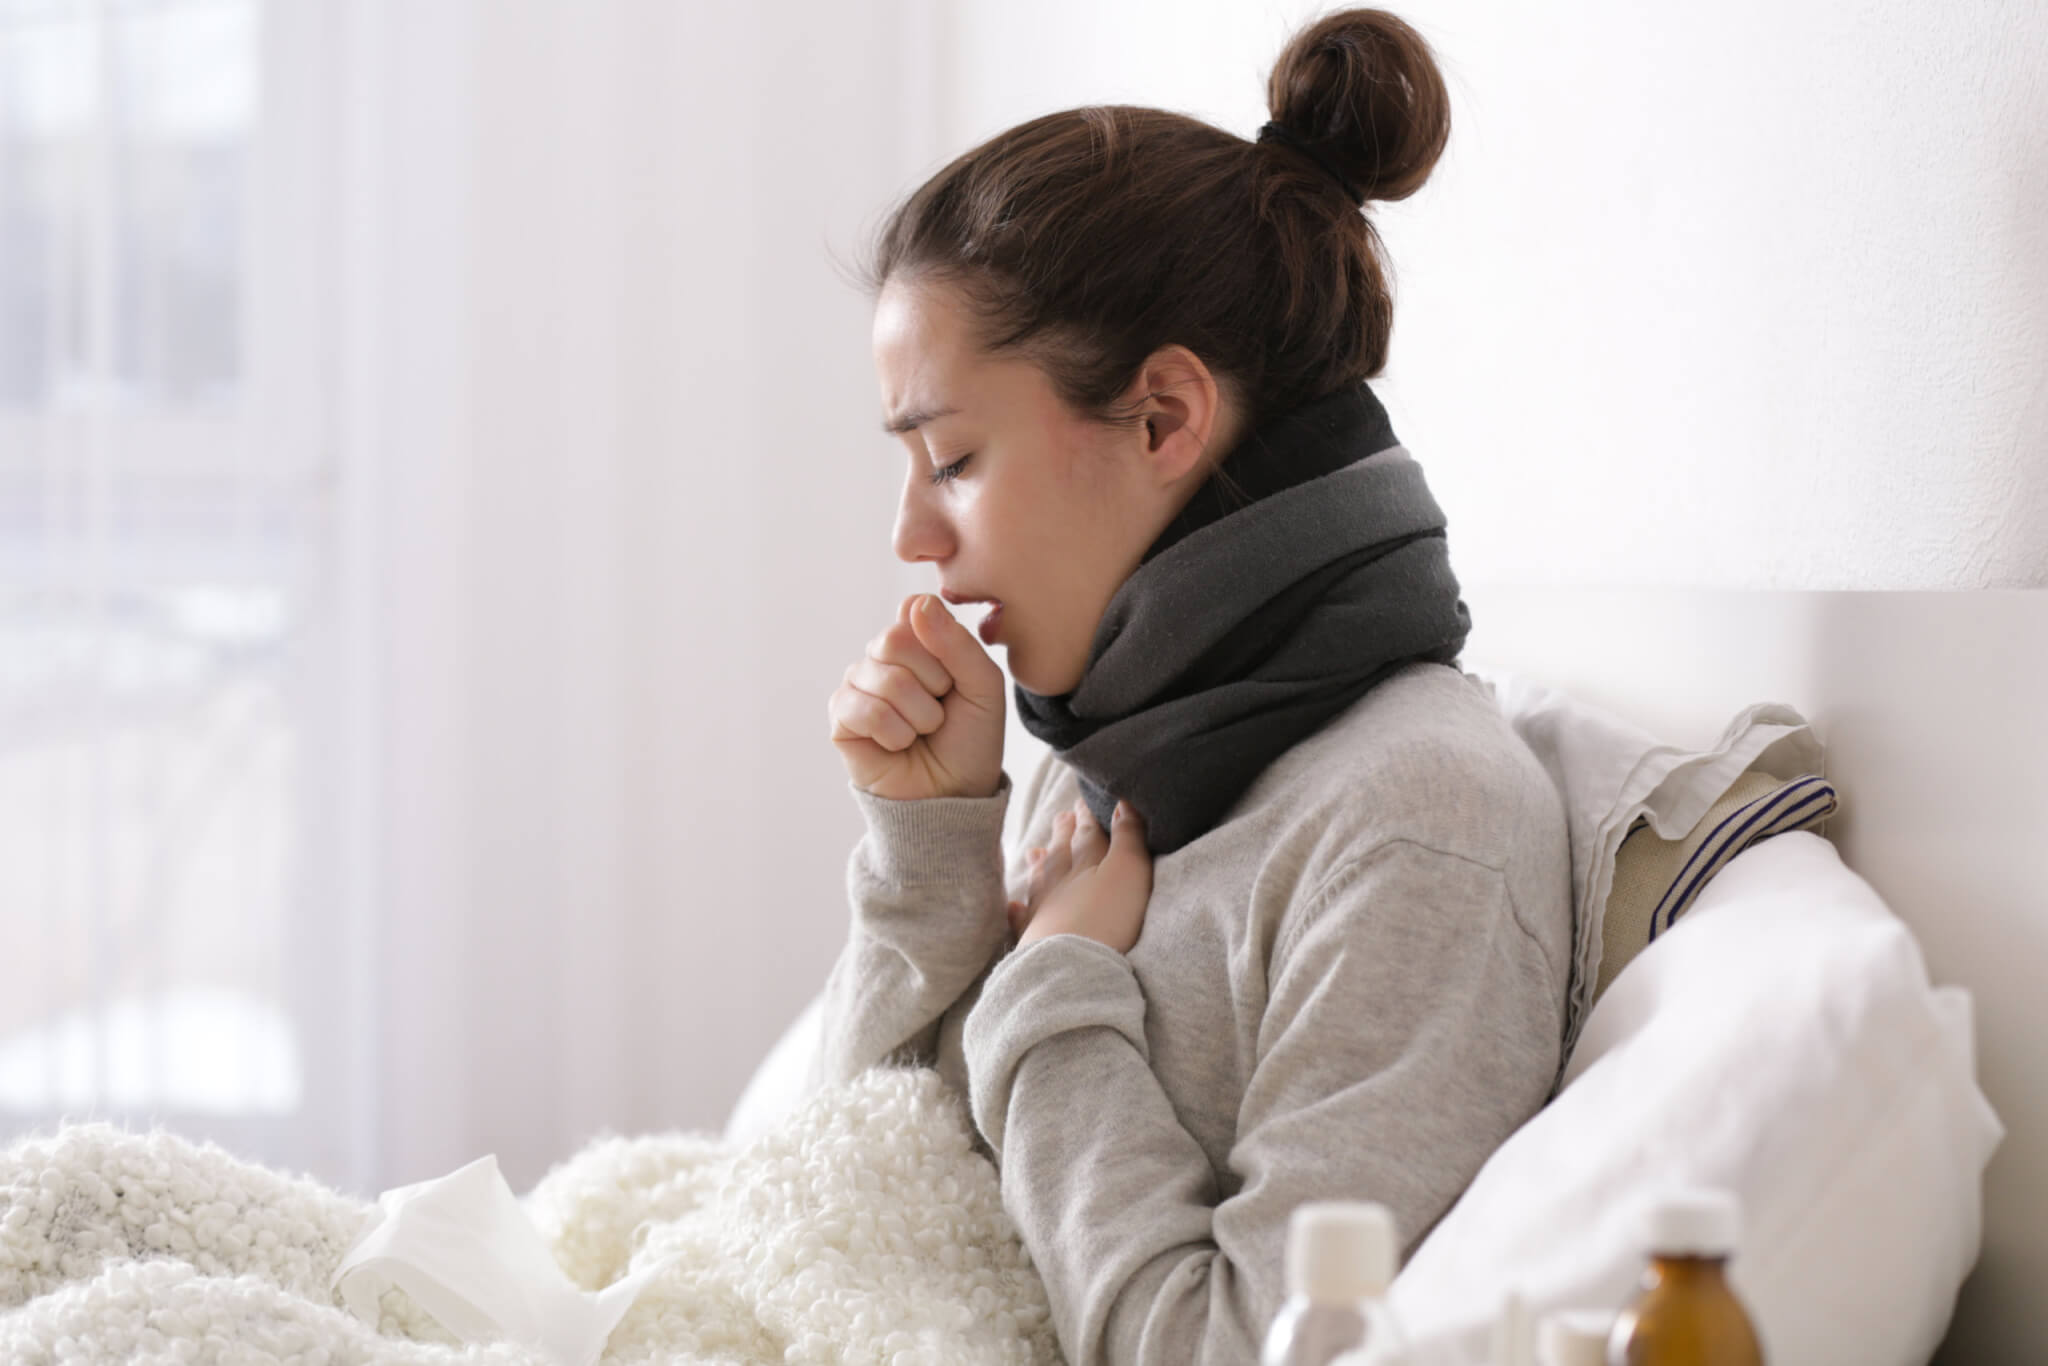 Woman sick in bed with cold, cough, COVID symptoms